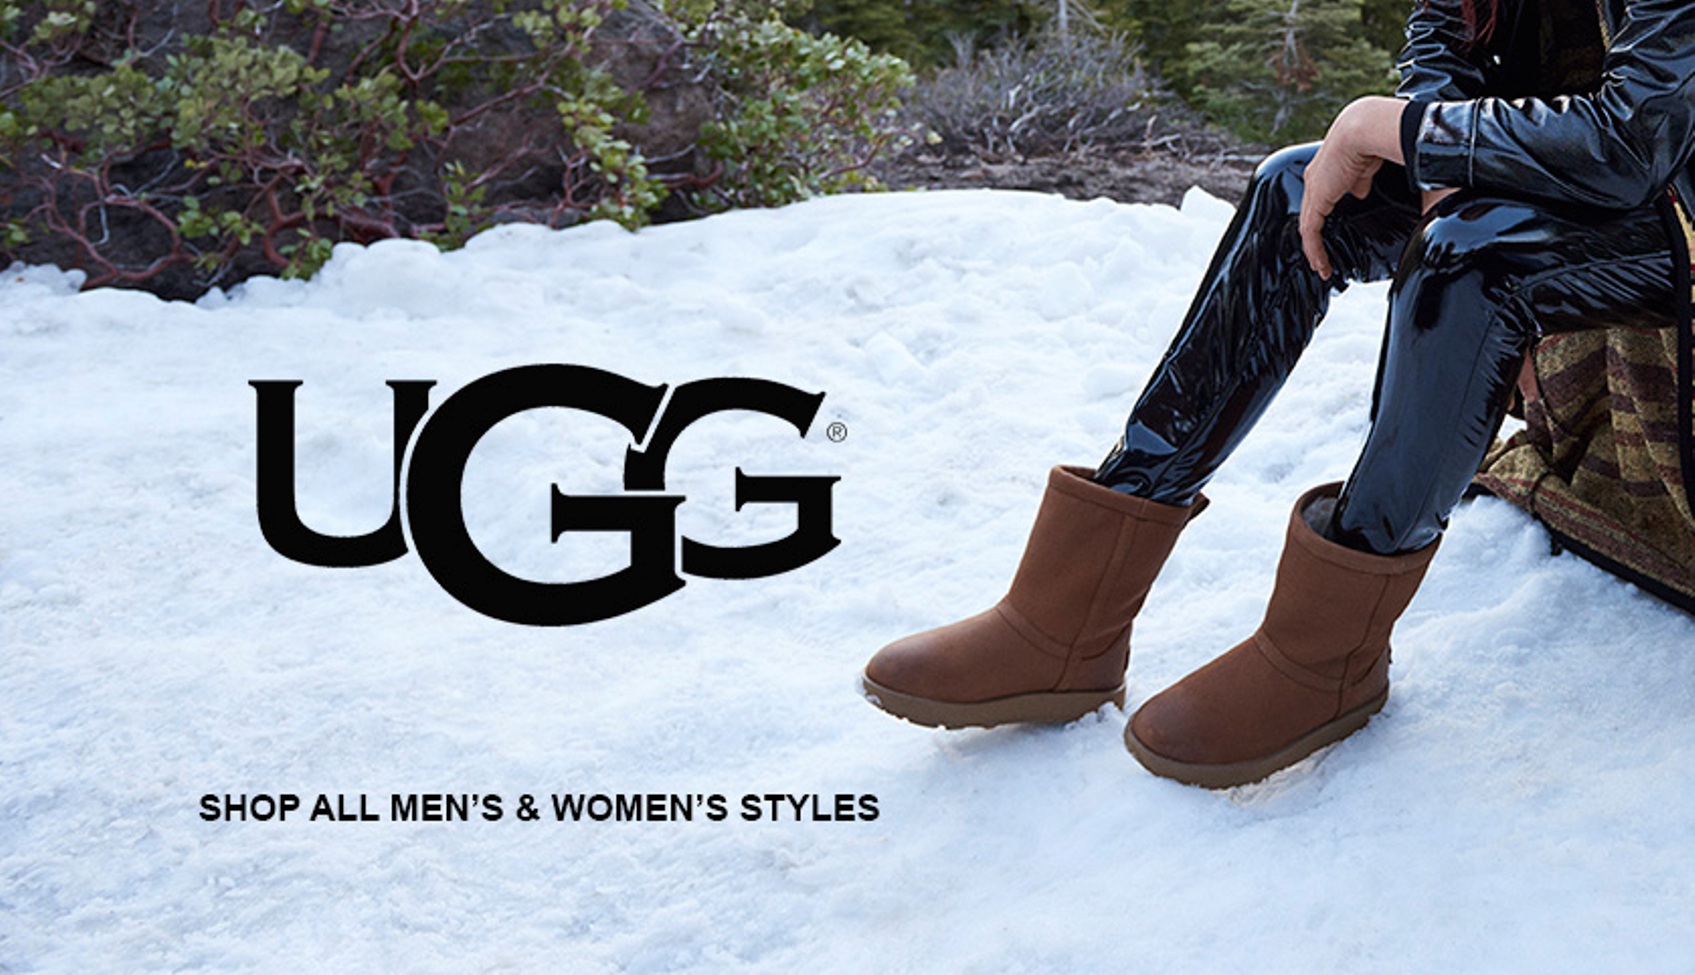 uggs boots